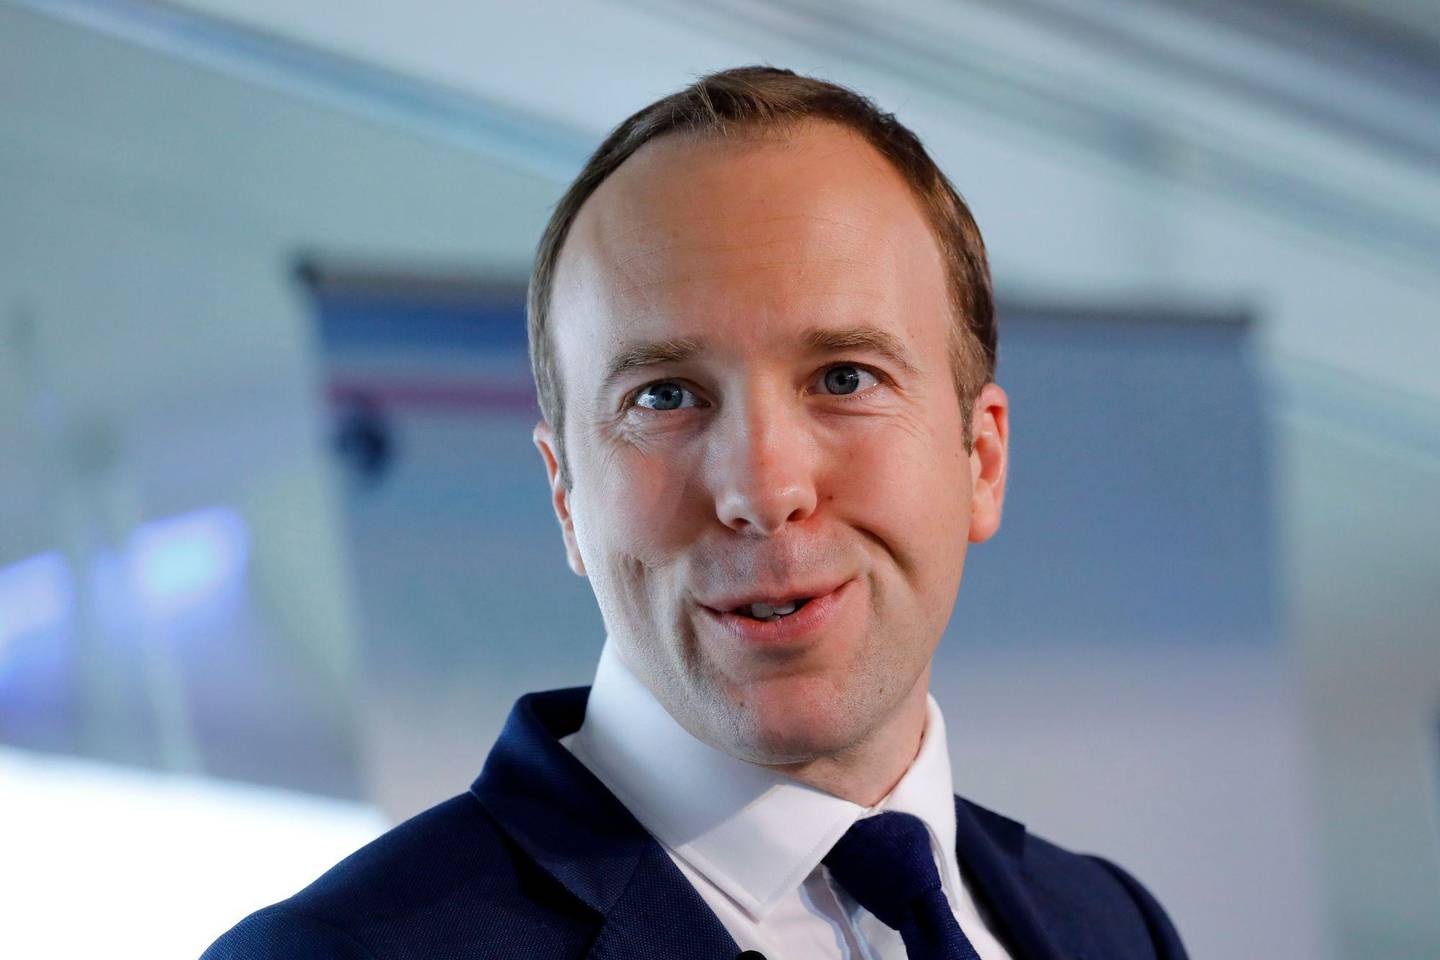 Britain's Health and Social Care Secretary Matt Hancock launches his leadership campaign in London on June 10, 2019. - Around a dozen British Conservative MPs will formally throw their hats into the ring on Monday in the fight to replace Theresa May as party leader and Prime Minister, with her former foreign secretary Boris Johnson seen as the runaway favourite. (Photo by Tolga AKMEN / AFP)